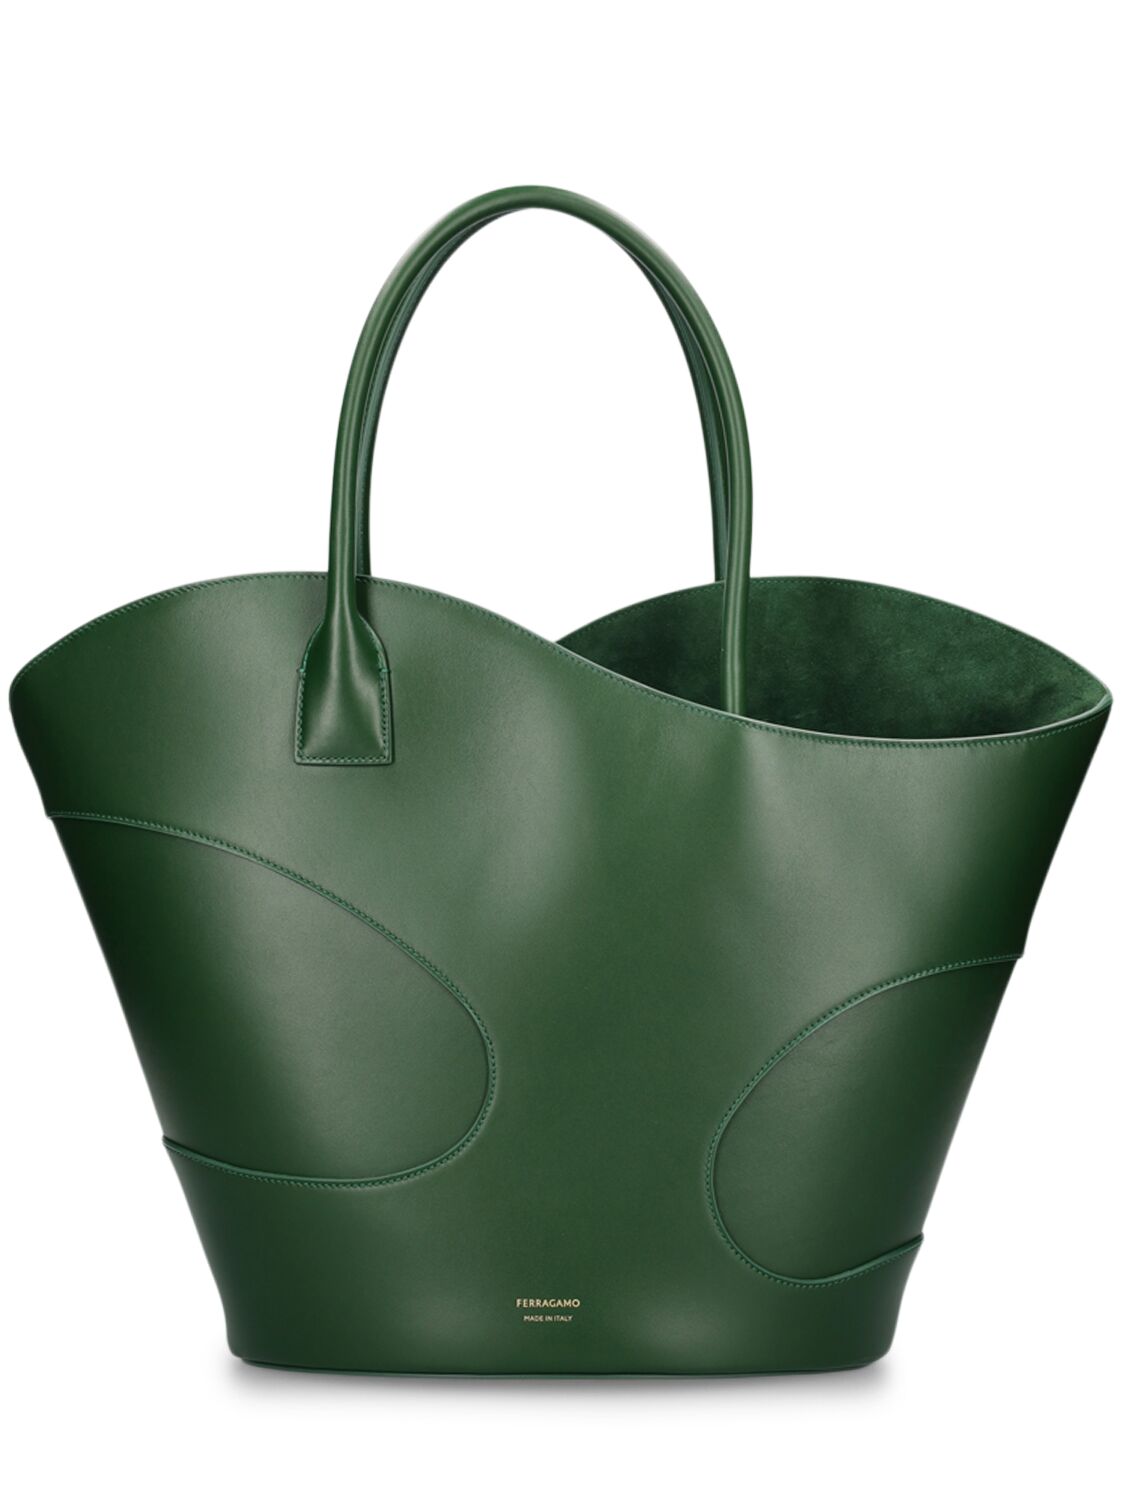 Ferragamo Cutout Leather Tote Bag In Forest Green